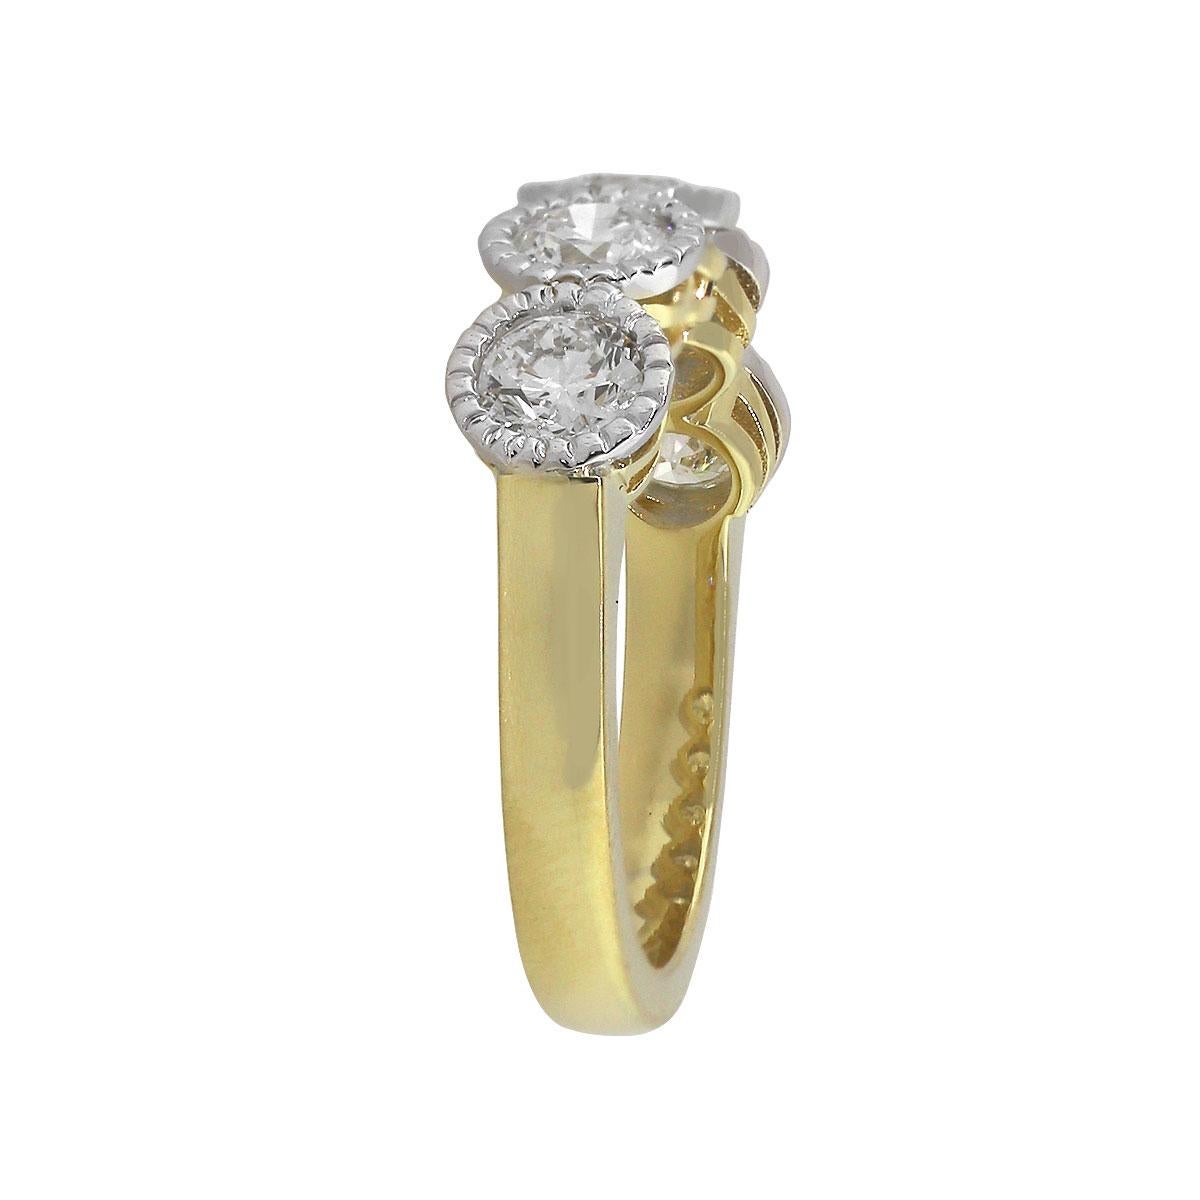 Material: 18k White Gold
Diamond Details: Approx. 1.56ctw of round cut diamonds. Diamonds are G/H in color and VS in clarity
Ring Size: 6.25
Measurements: 0.91